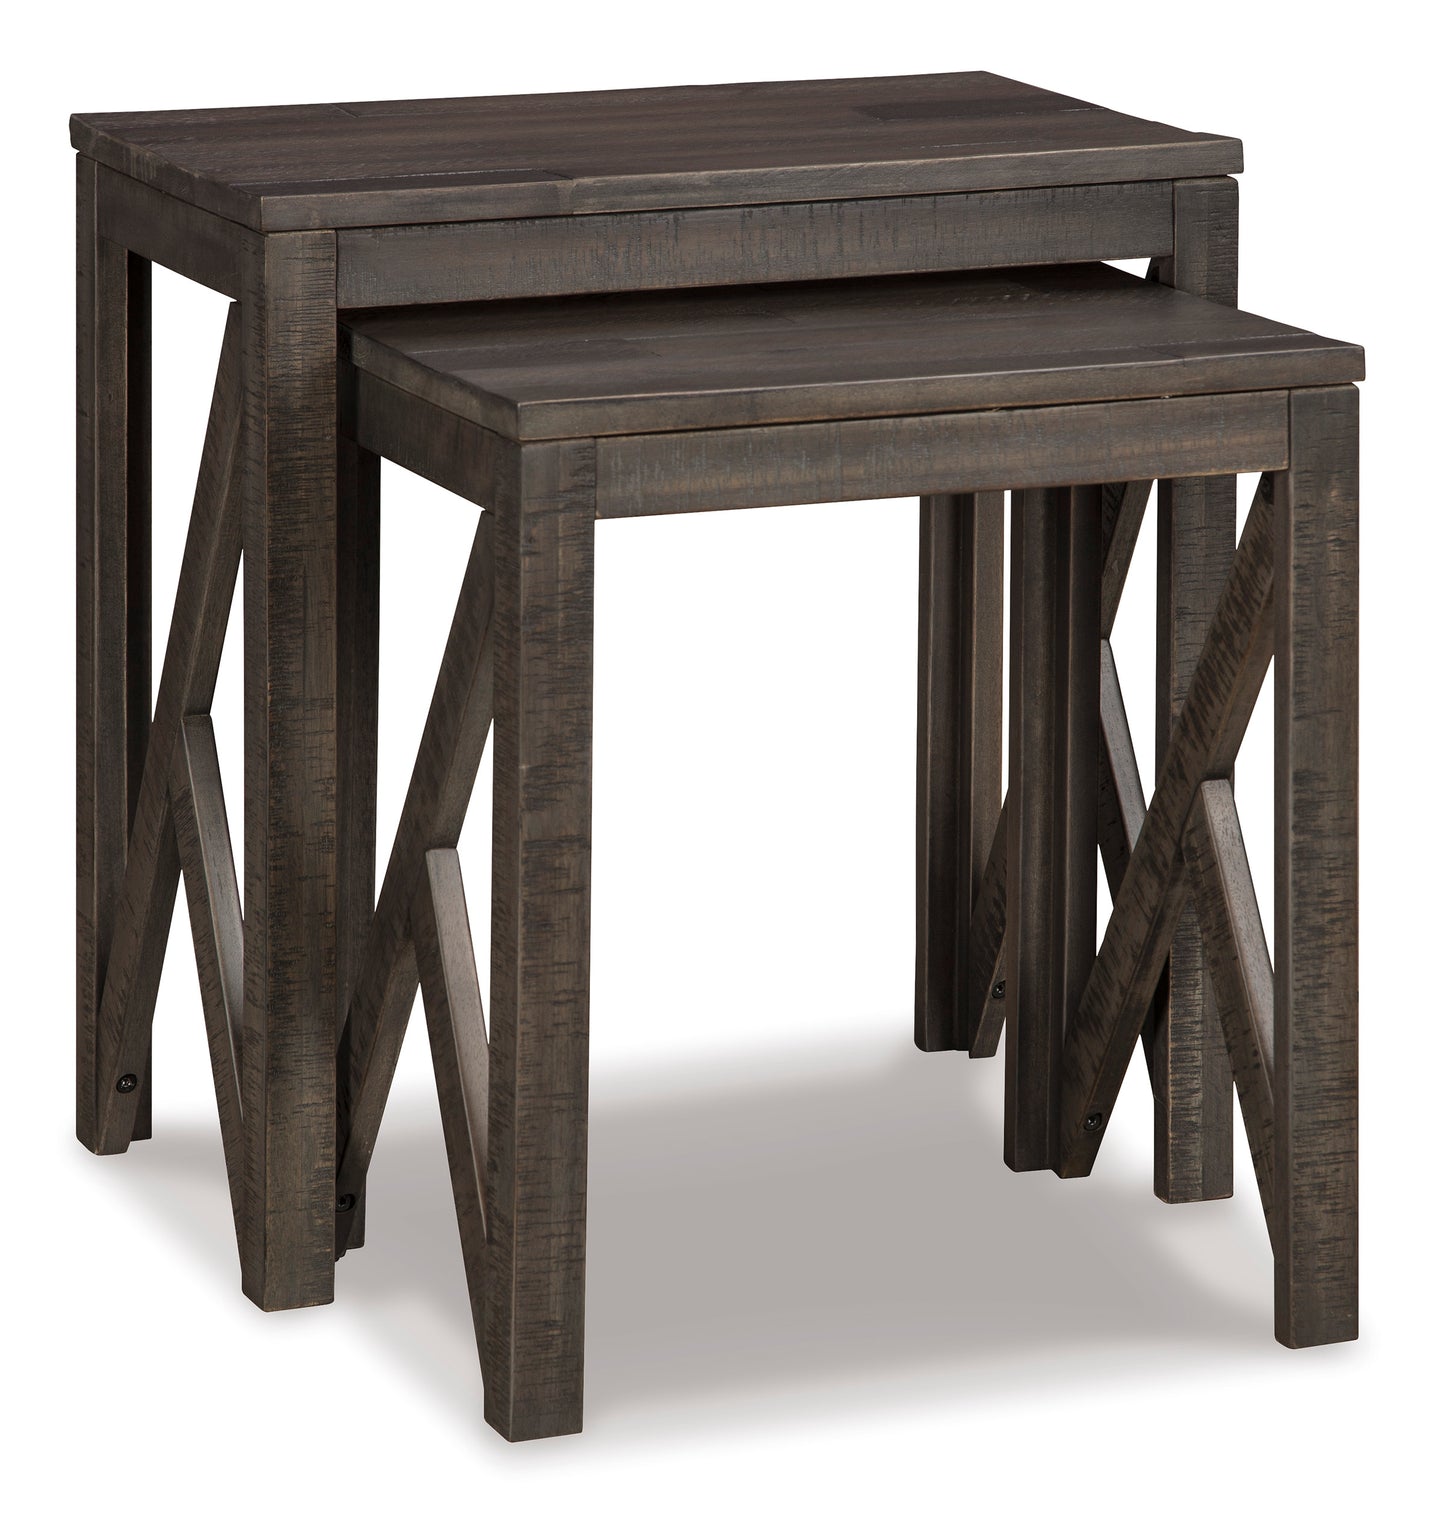 A40 Accent Table (Set of 2)